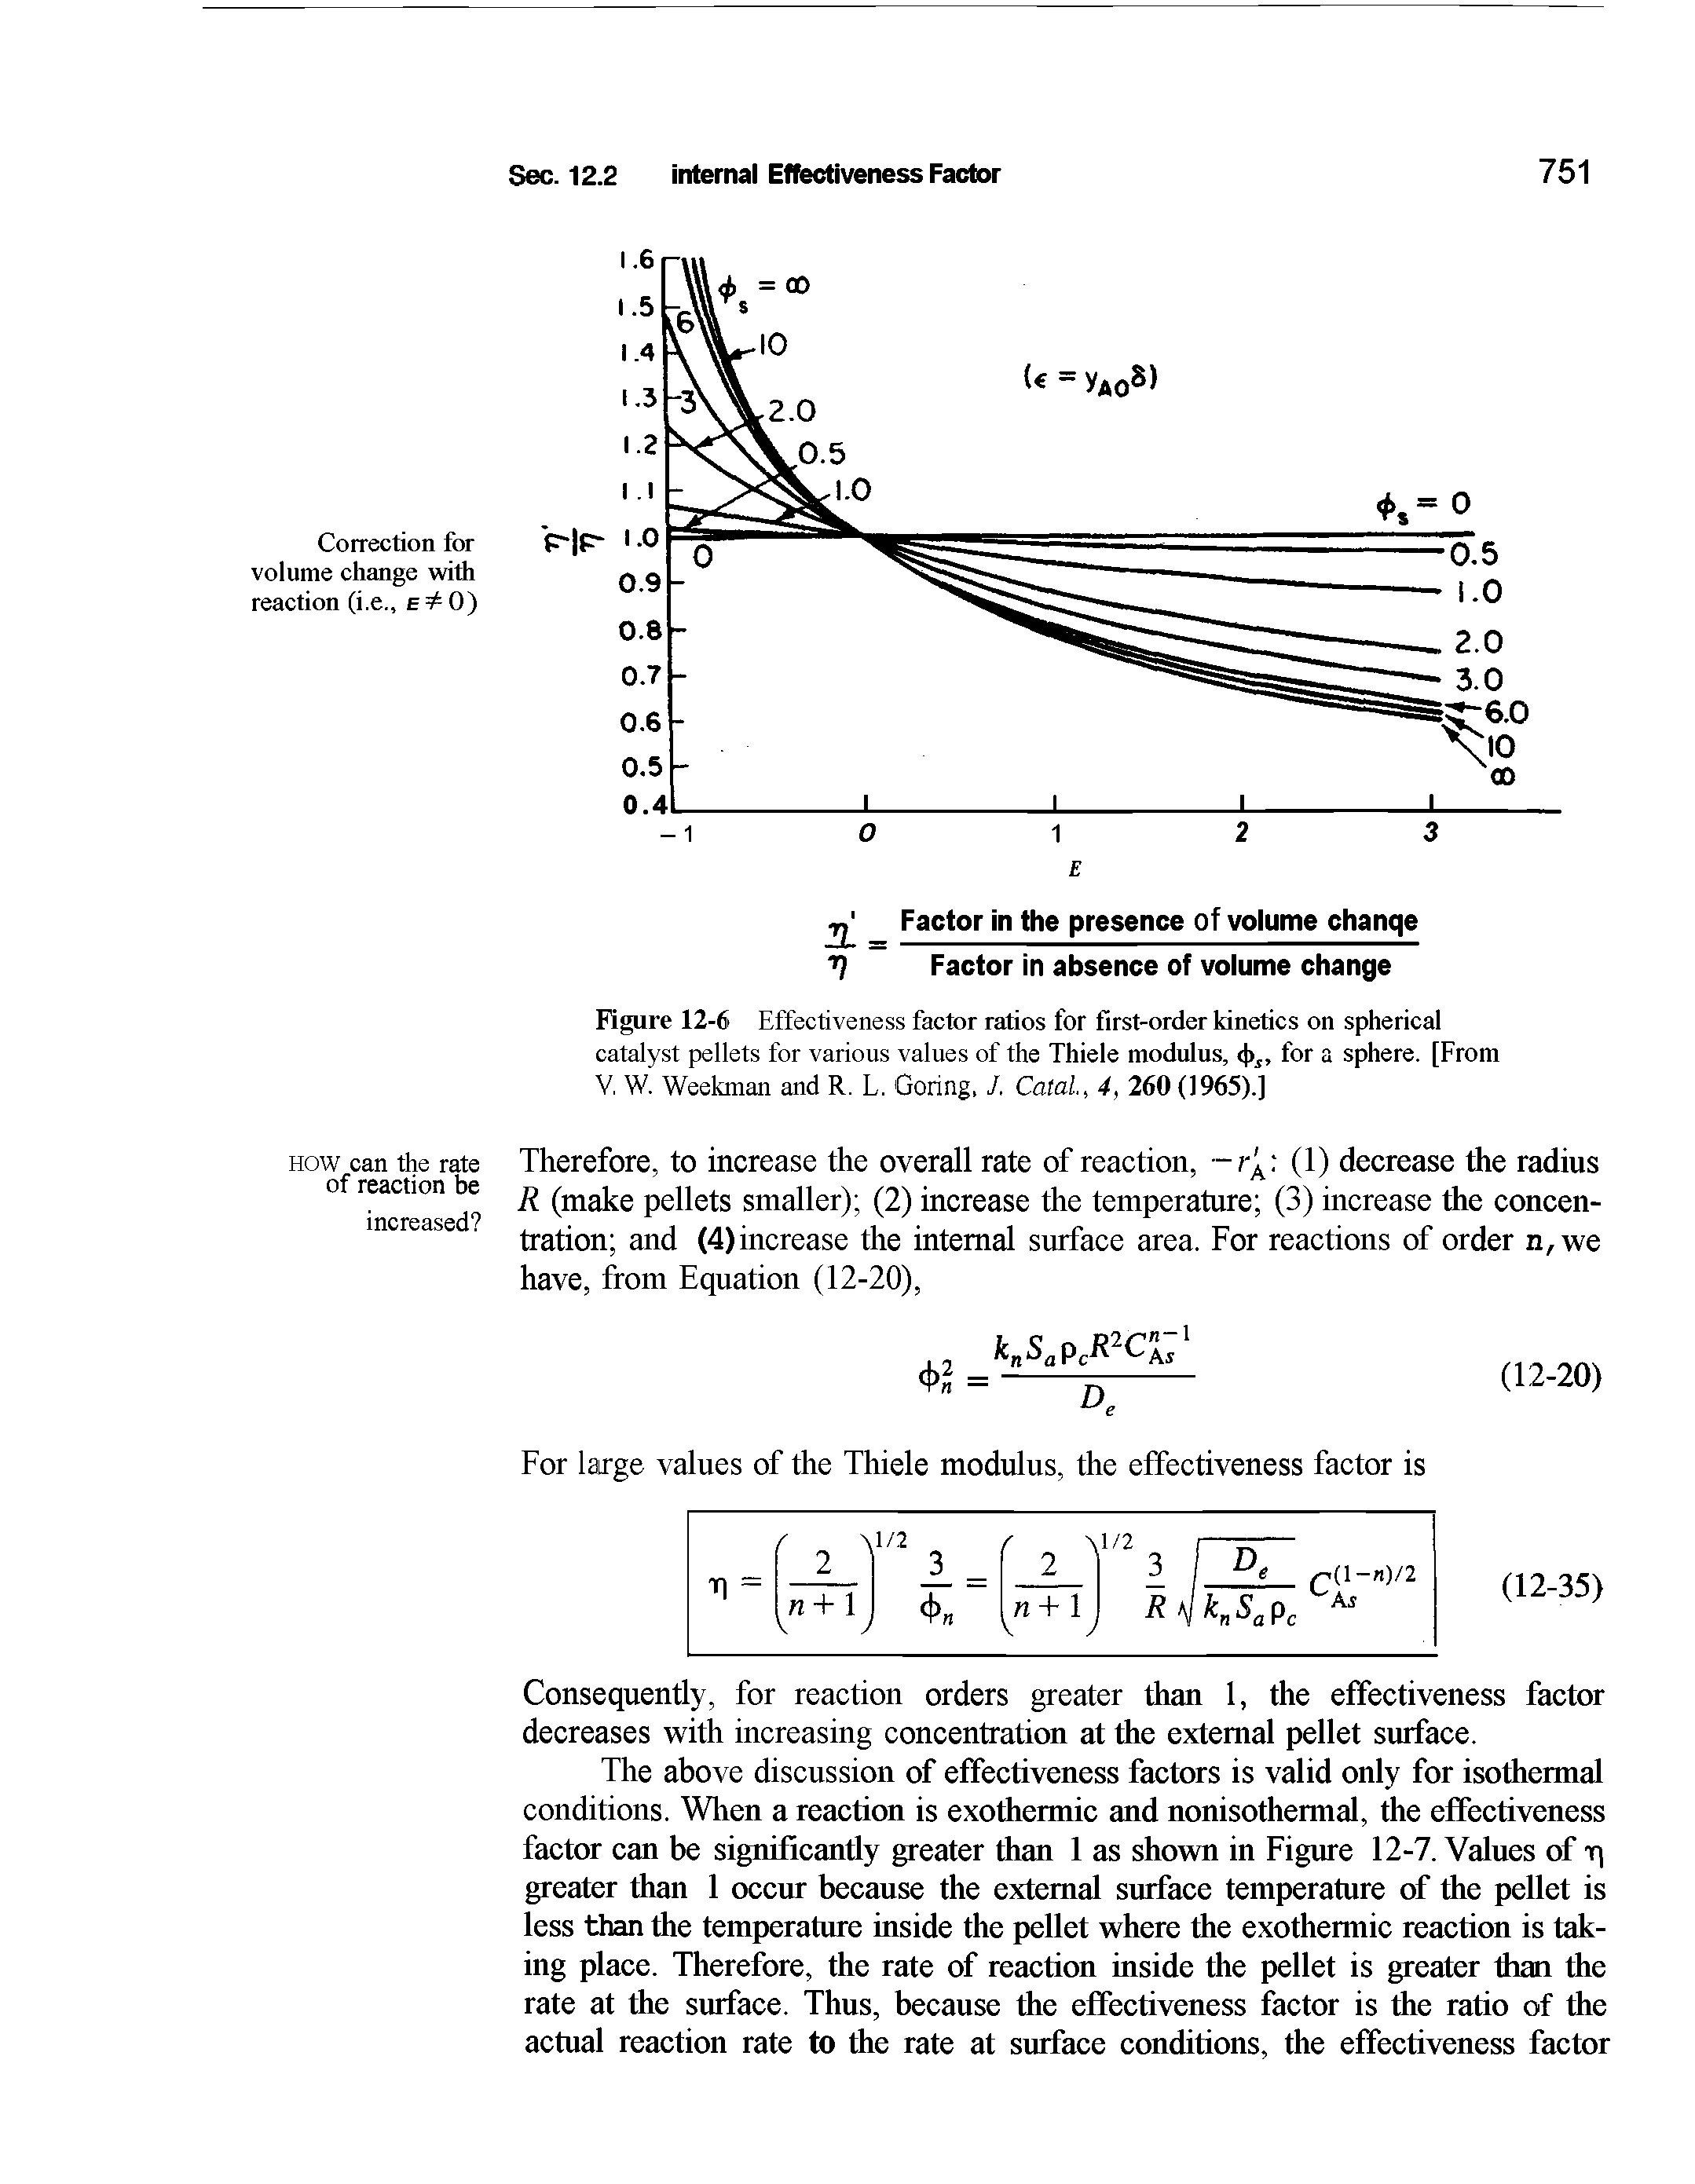 Figure 12-6 Effectiveness factor ratios for first-order kinetics on spherical catalyst pellets for various values of the Thiele modulus, <1), for a sphere. [From V, W. Weekman and R. L. Goring, J. Catal, 4, 260 (1965).]...